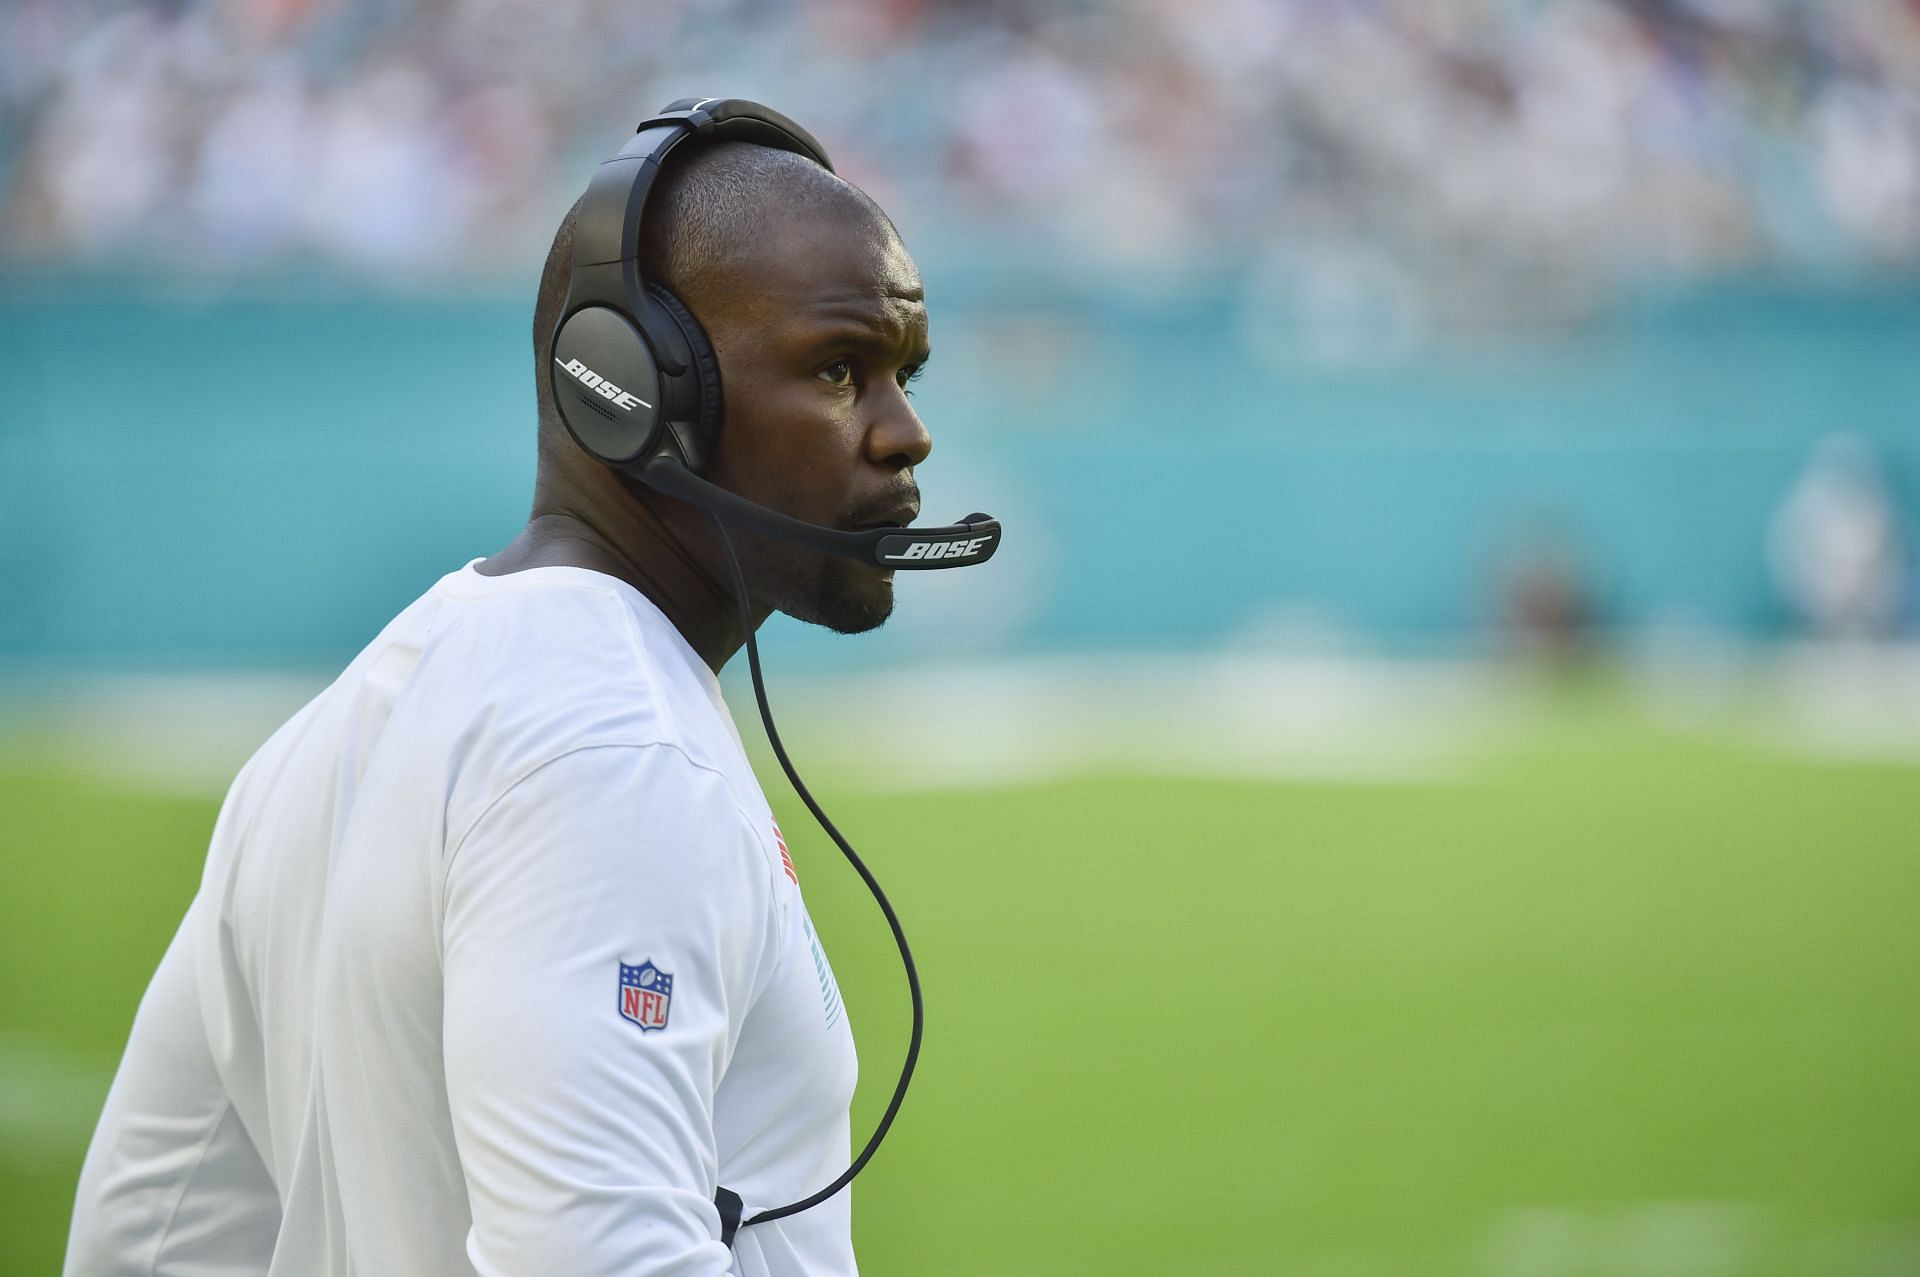 Brian Flores may not have been the man going through a sham interview